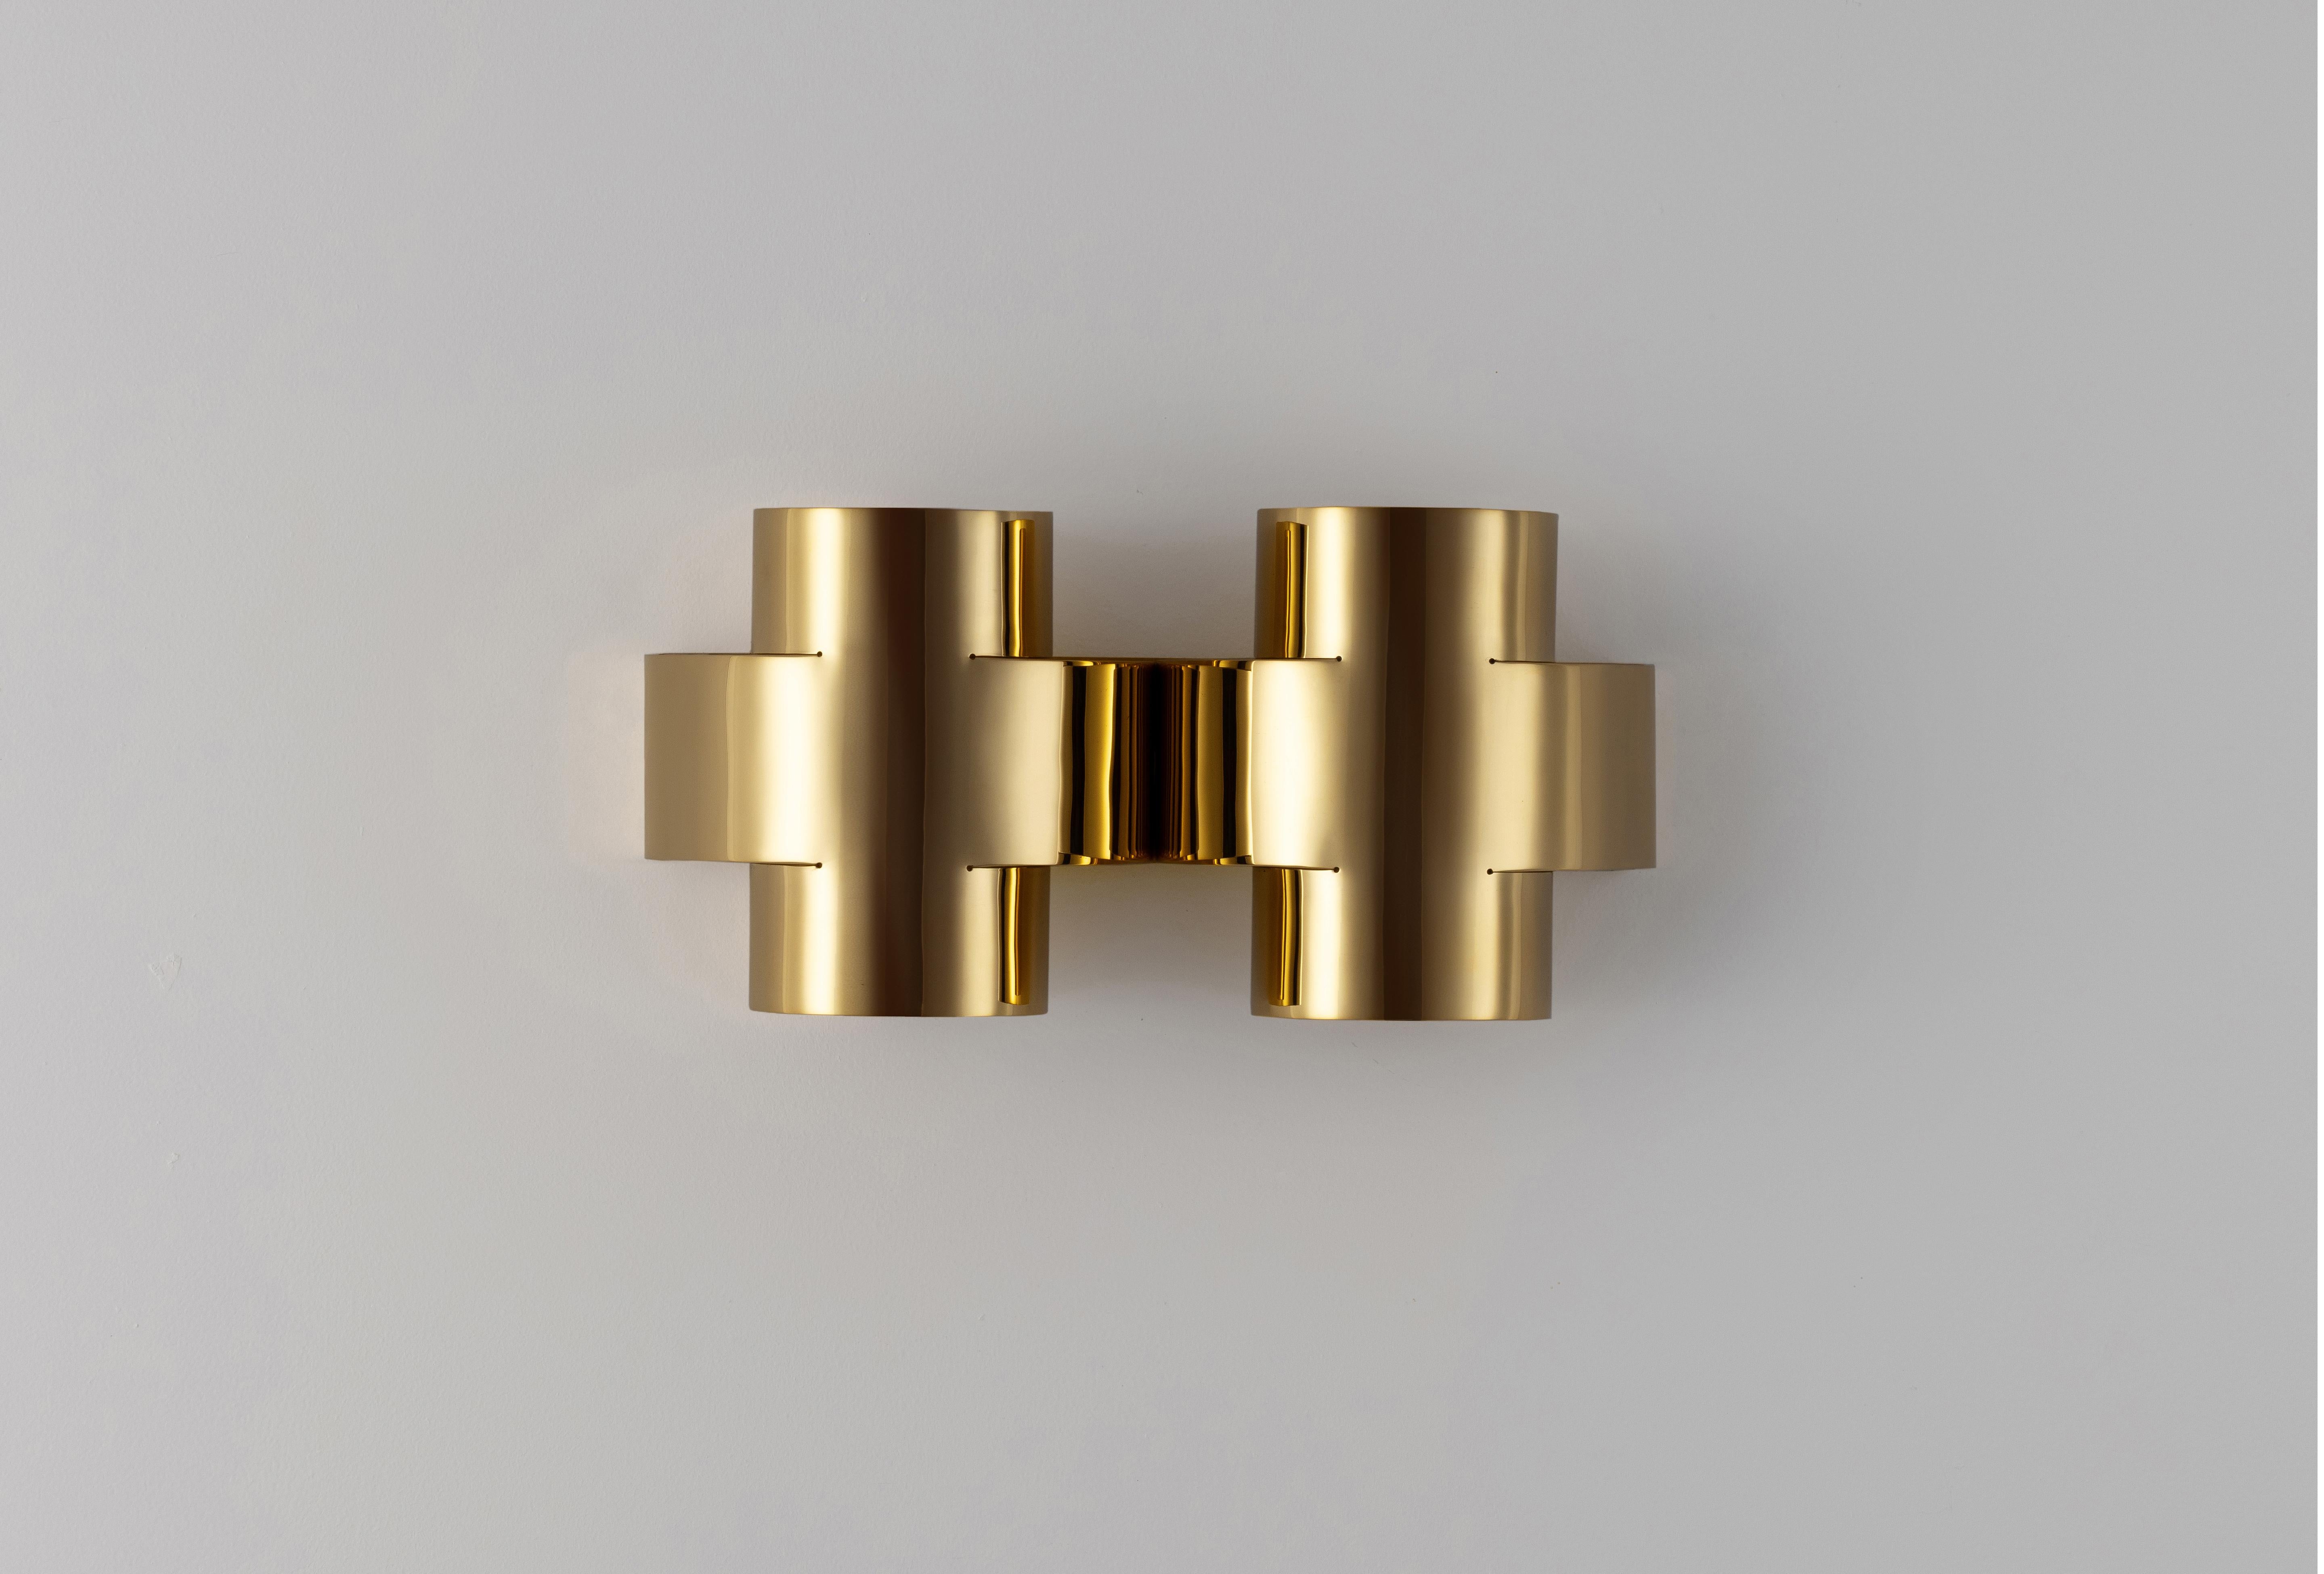 Buffed brass plus two applique by Paul Matter
Dimensions: L: 480 mm H: 254 mm D: 155 mm
1 Type E27 Base, 3W - 5W LED
Warm White, Voltage 220-240V
CE Certified
Dimmable upon request
Materials: Brass

Finished in Burnt, Aged, Buffed Brass and